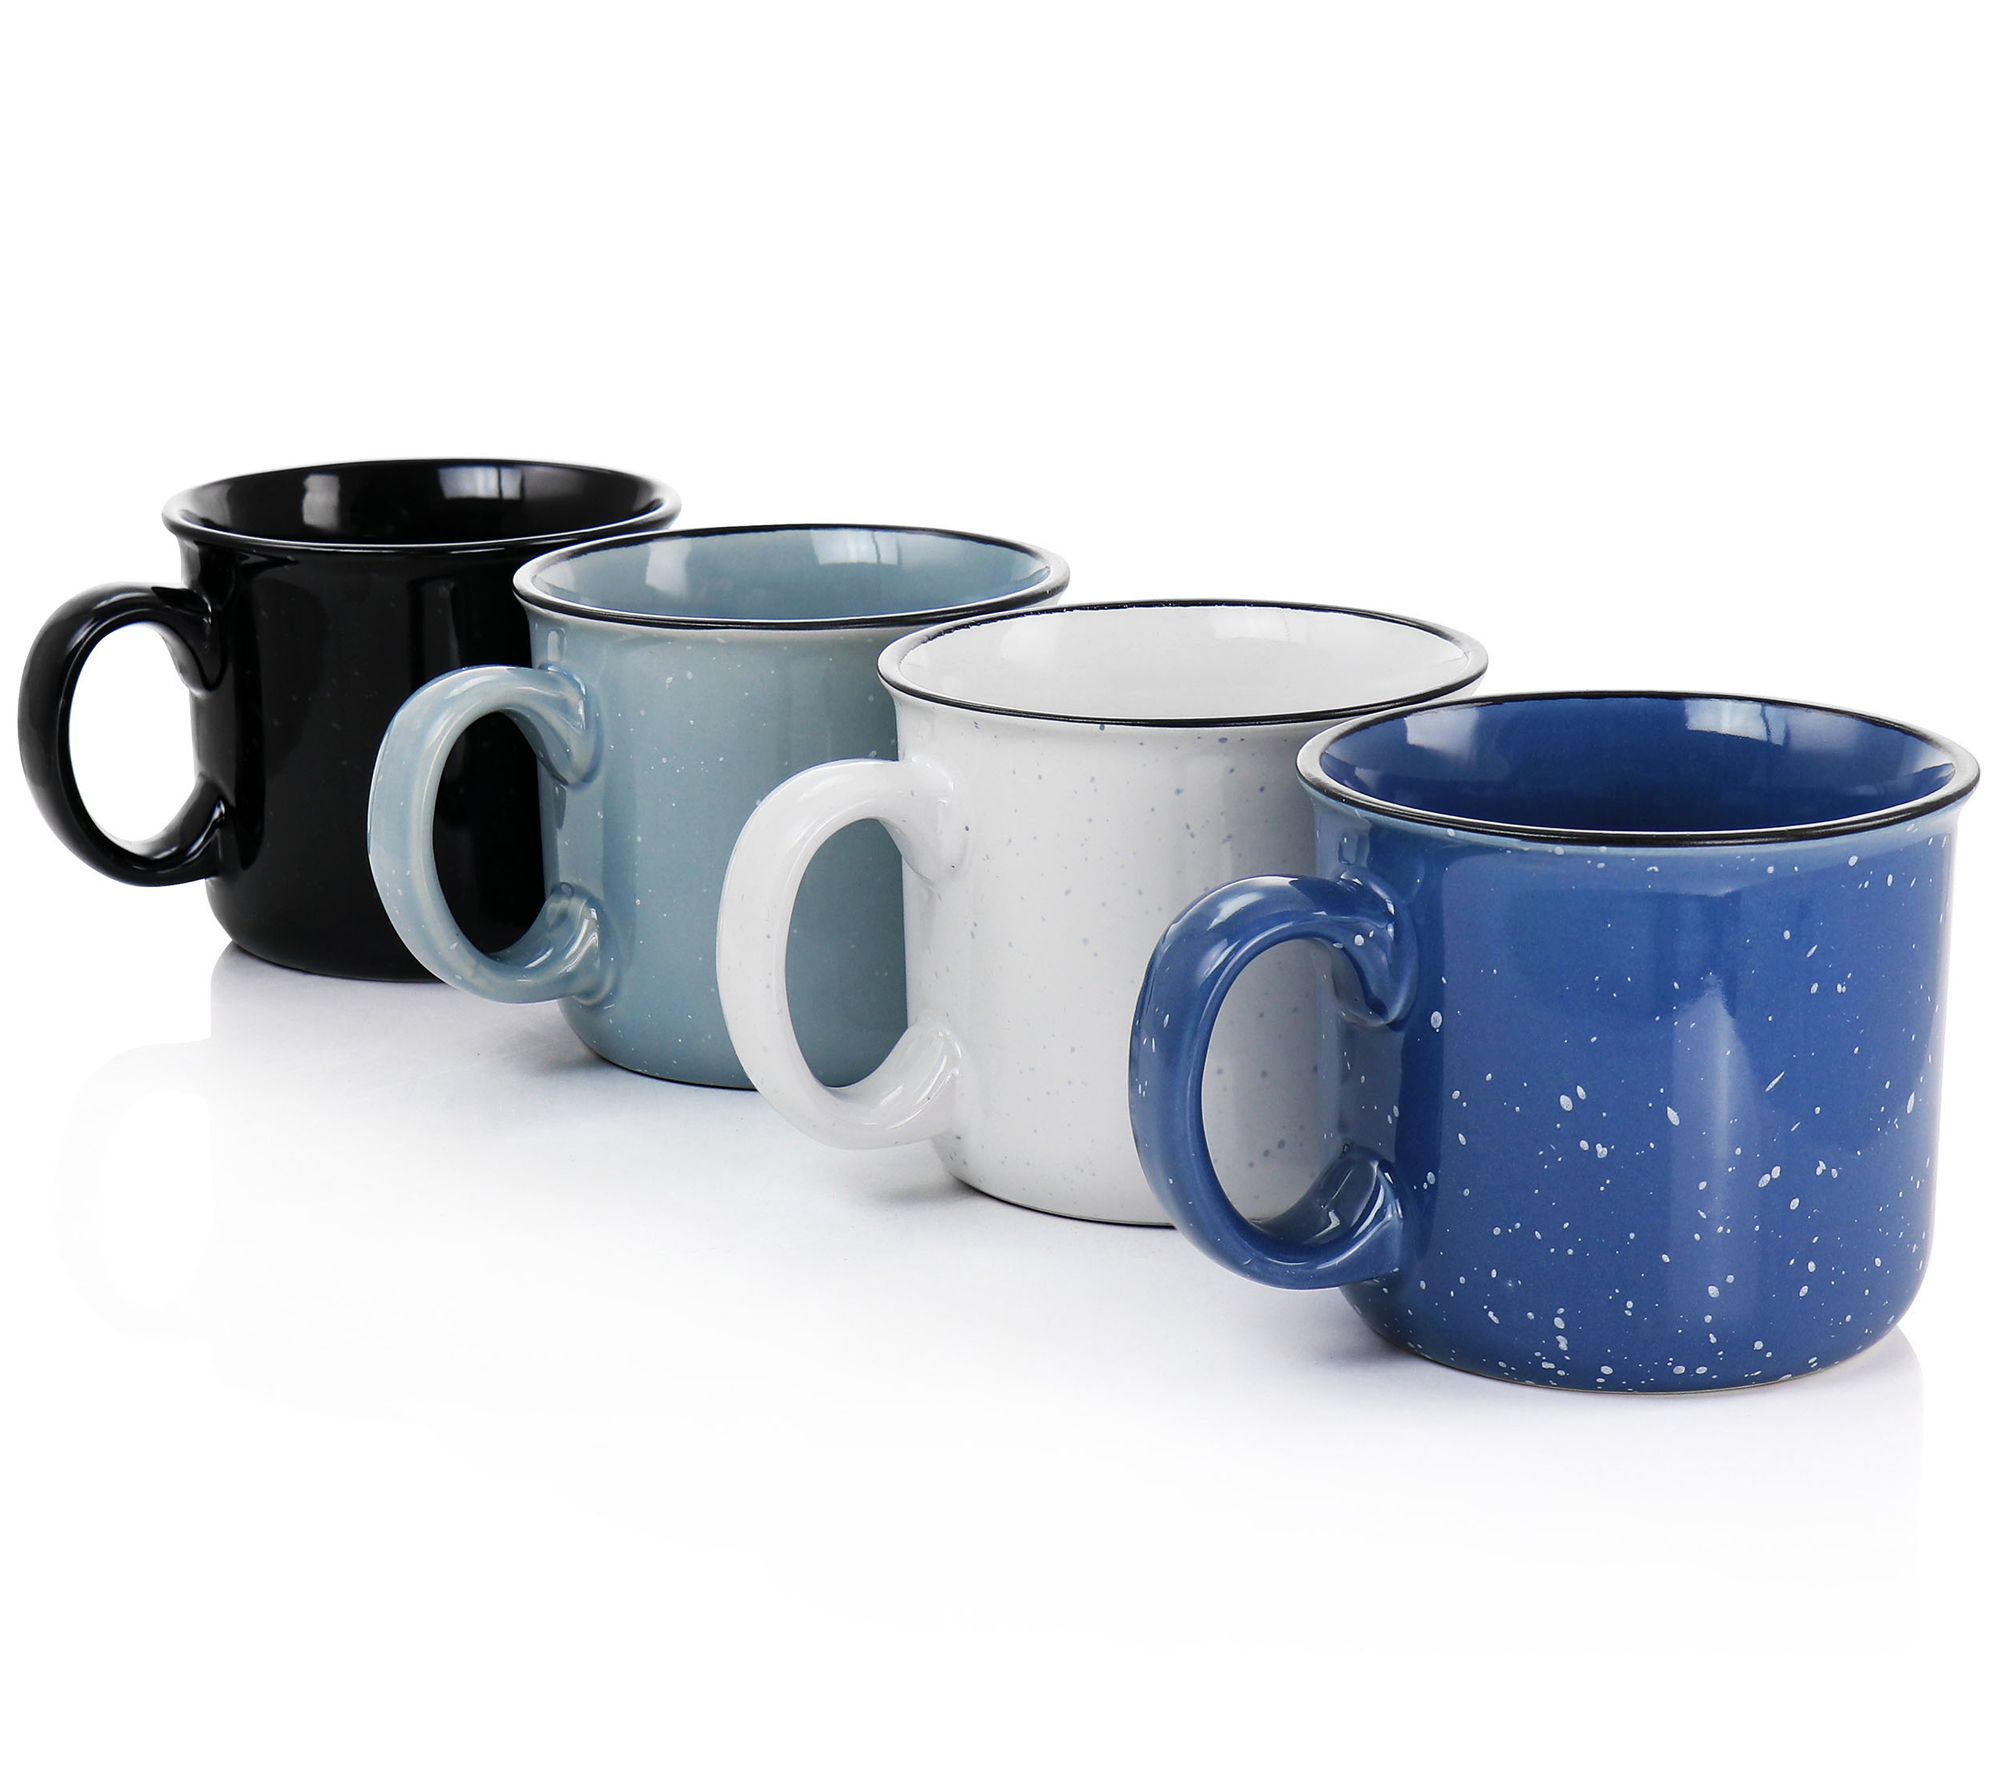 Mr. Coffee 12 Piece 3oz Stoneware Espresso Cup and Saucer Set in Assorted  Colors